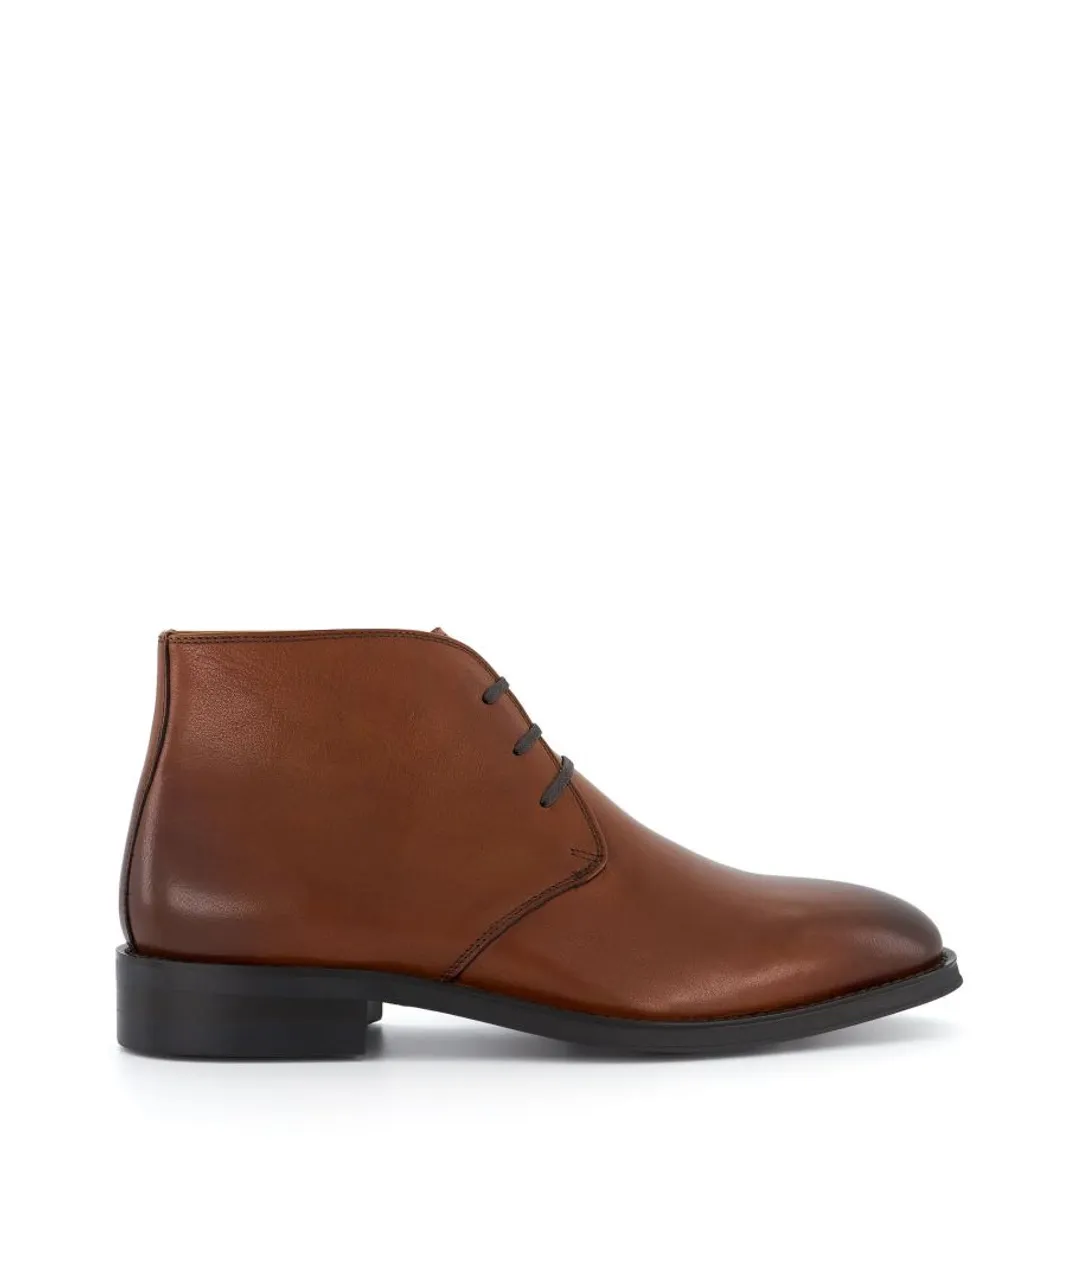 Dune London Mens Maloney - Chukka Boots - Tan Leather (archived)